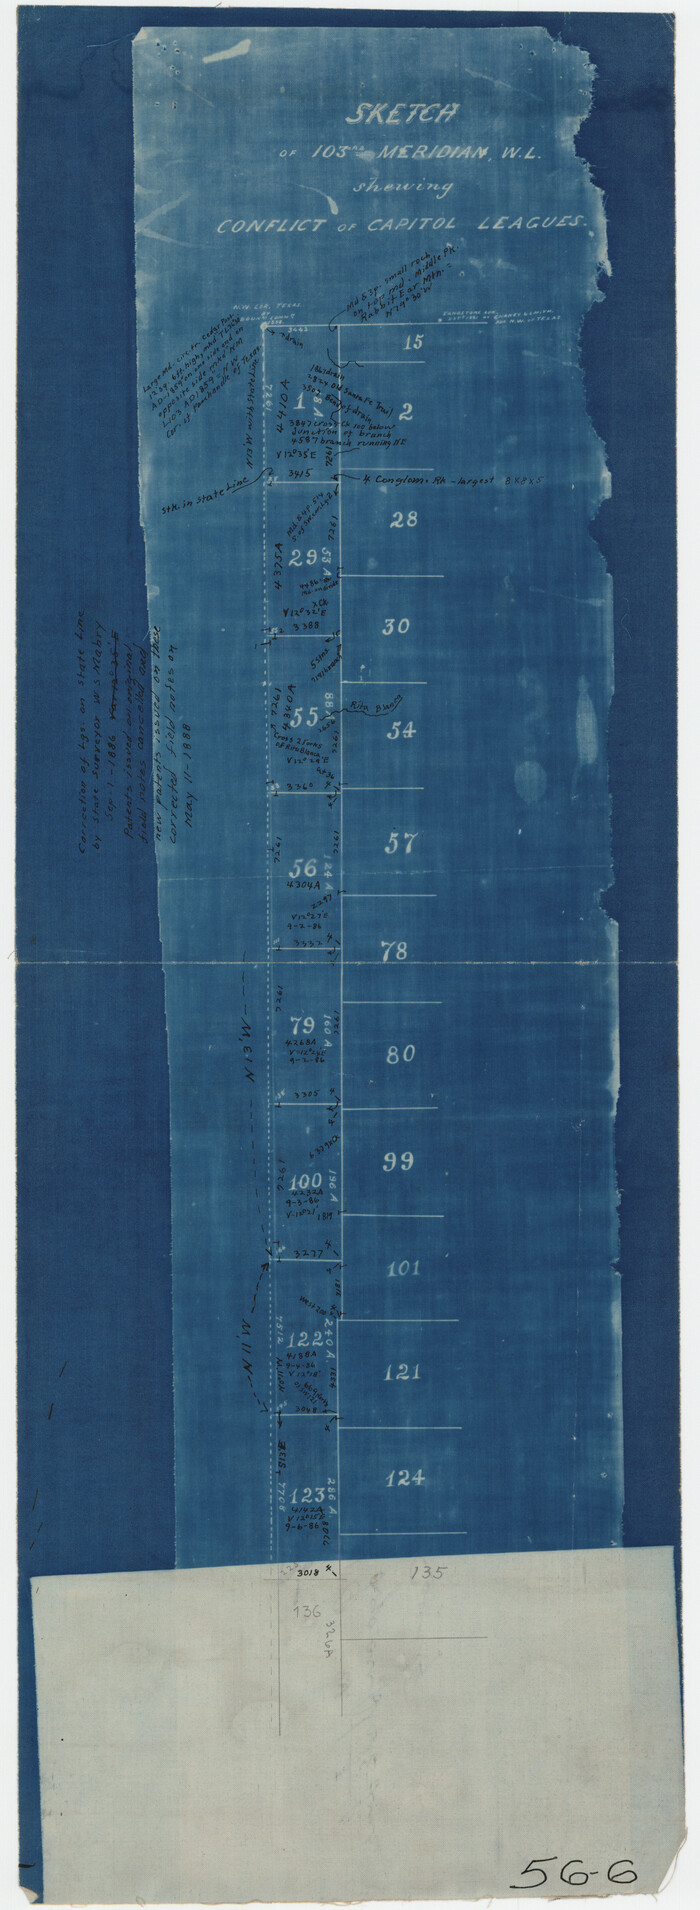 90578, Sketch of 103rd Meridian, W. L. showing Conflict of Capitol Leagues, Twichell Survey Records